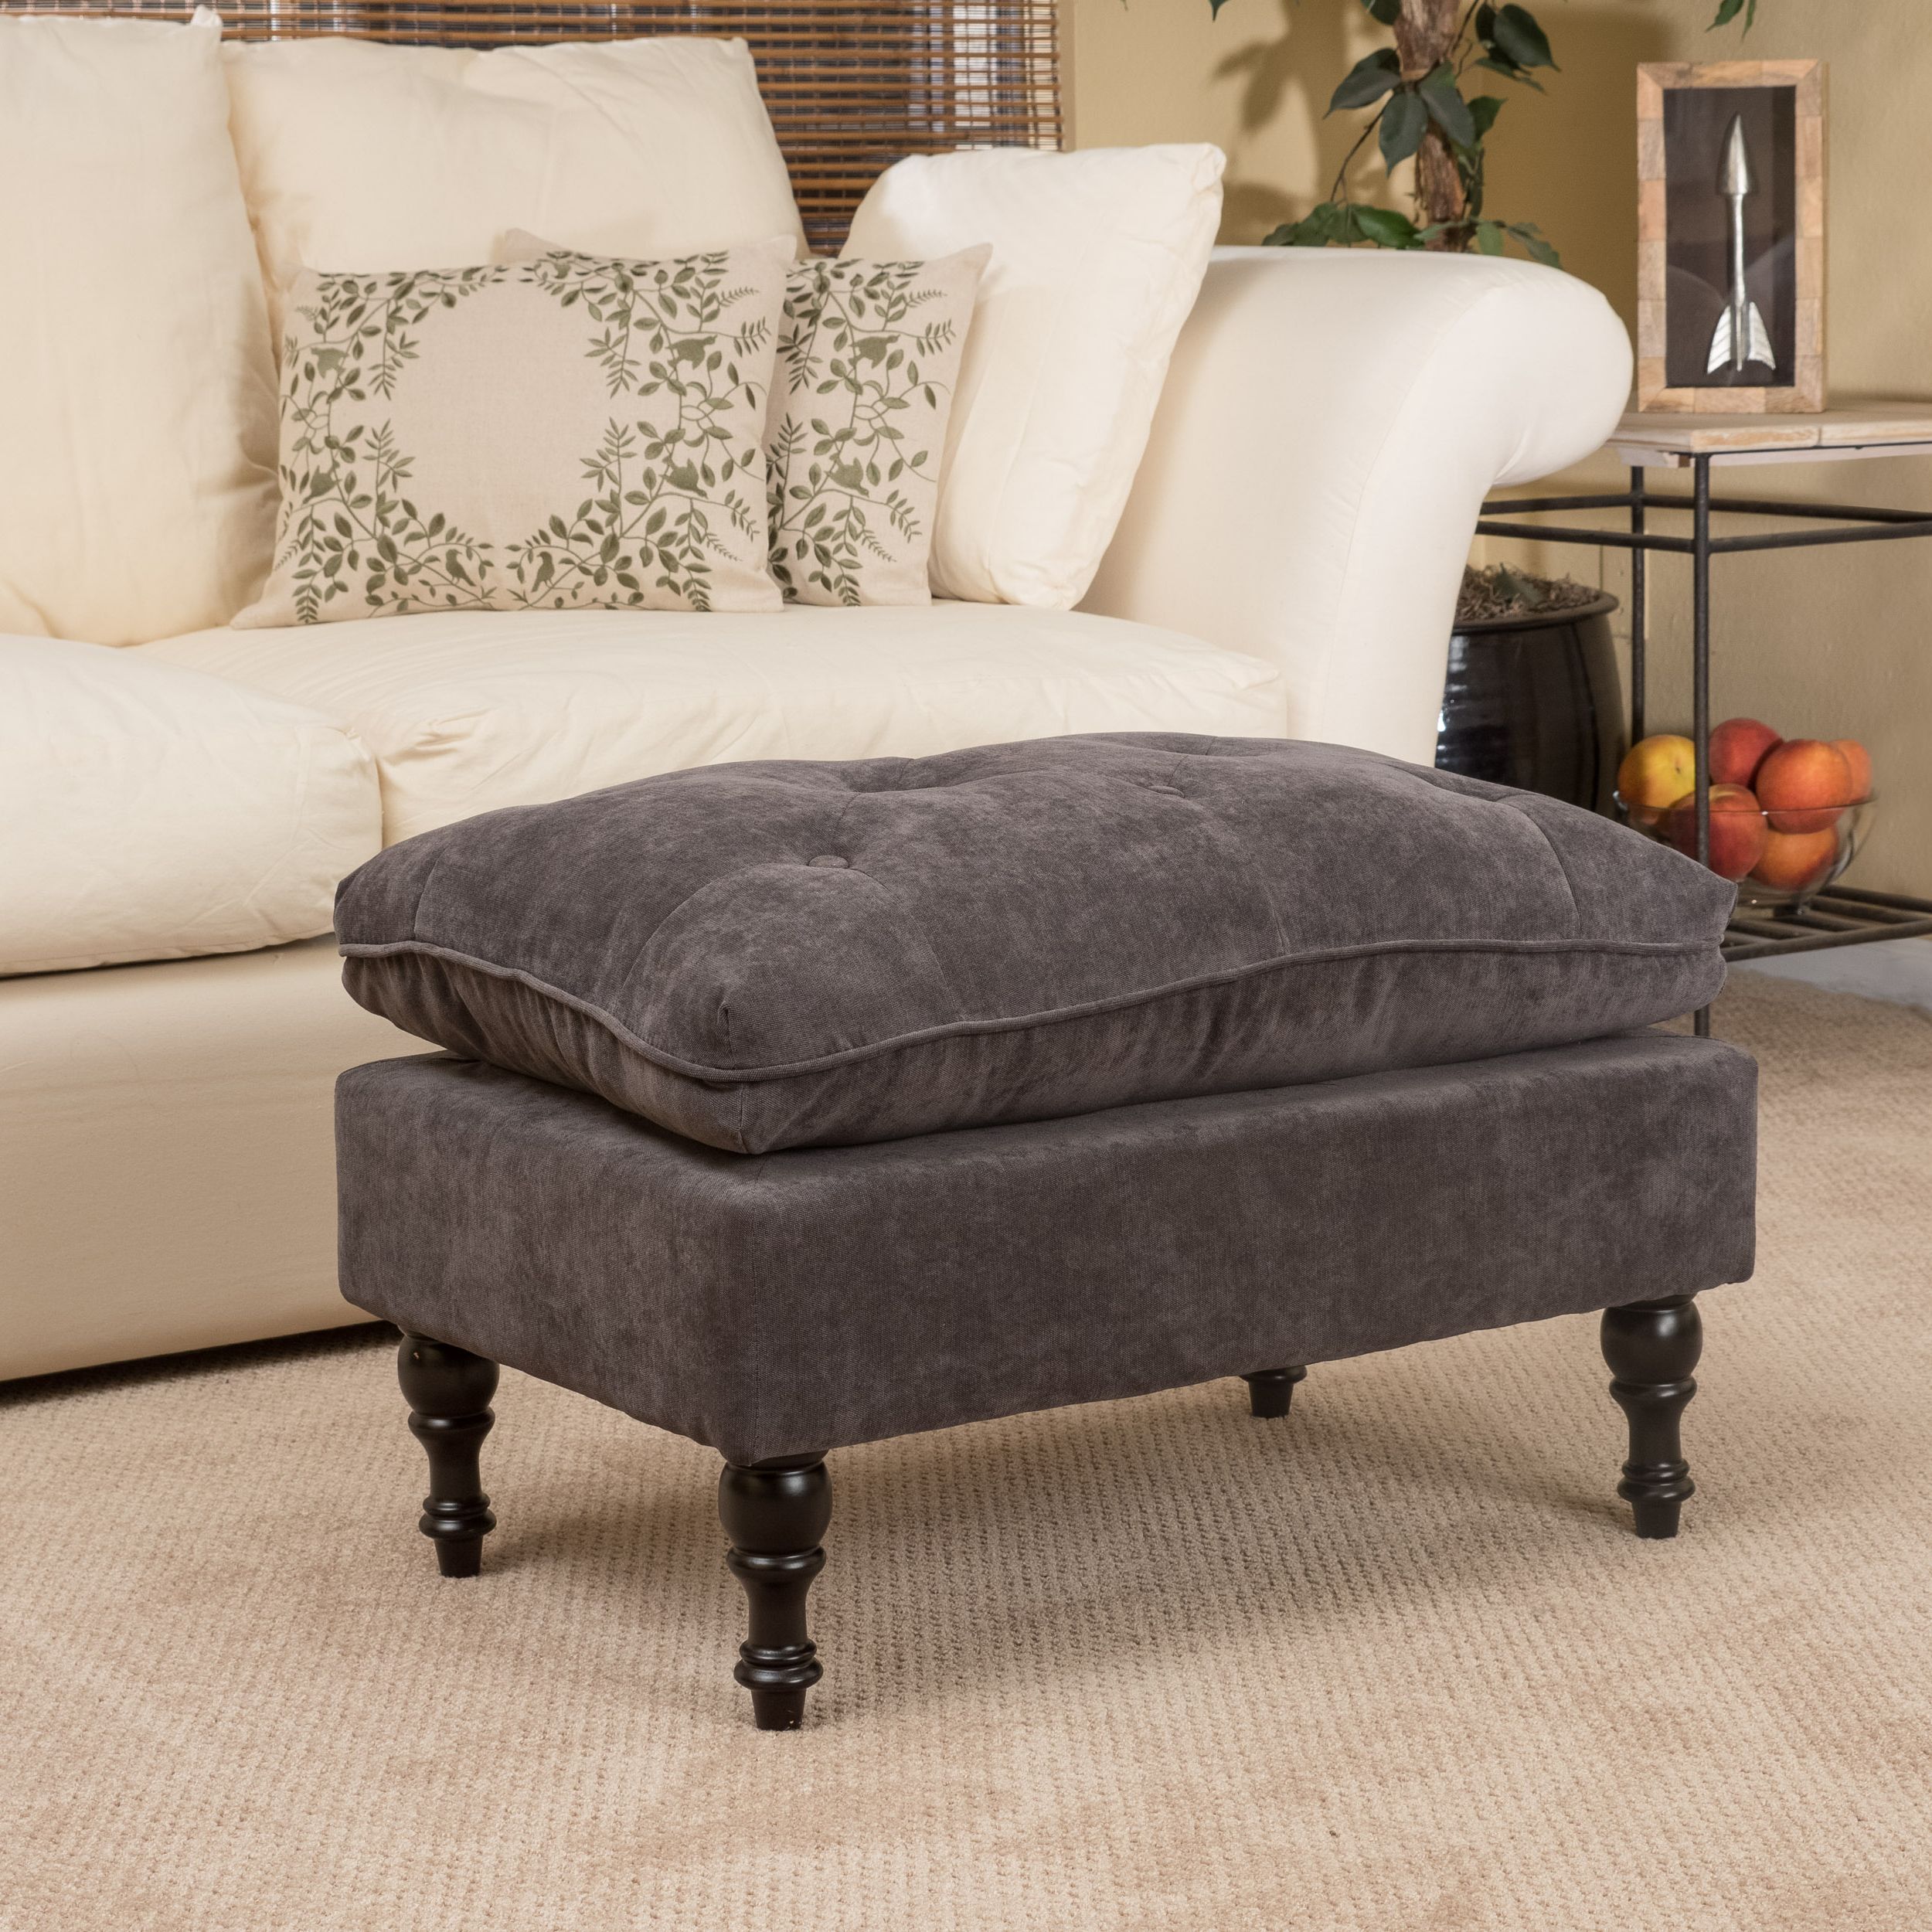 Gray Wool Pouf Ottomans Intended For Fashionable Cordoba Contemporary Button Tufted Fabric Ottoman, Gray – Walmart (View 6 of 10)